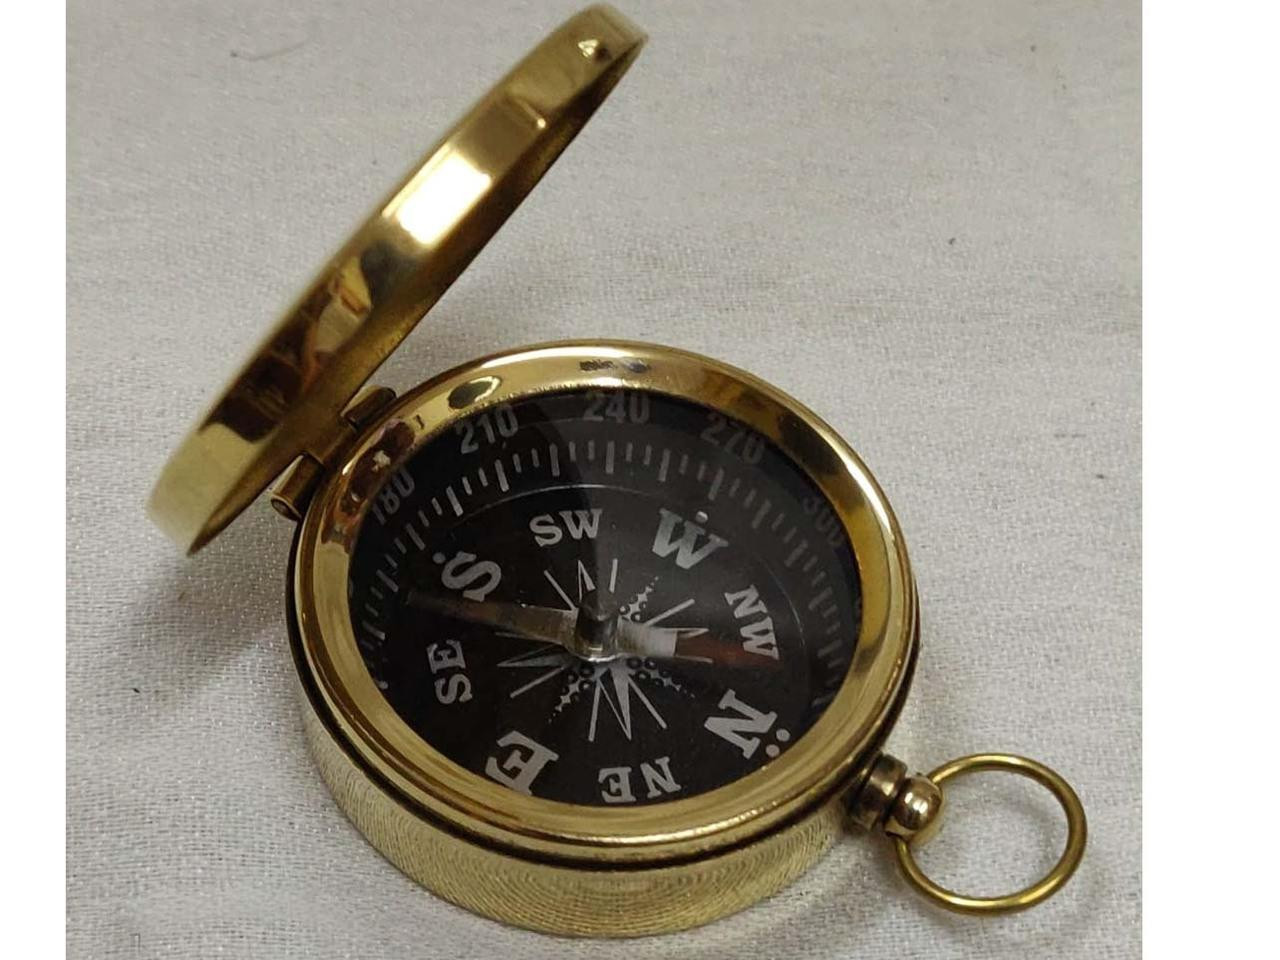 Vintage Retro Camping Brass Compass Pocket Watch Review 